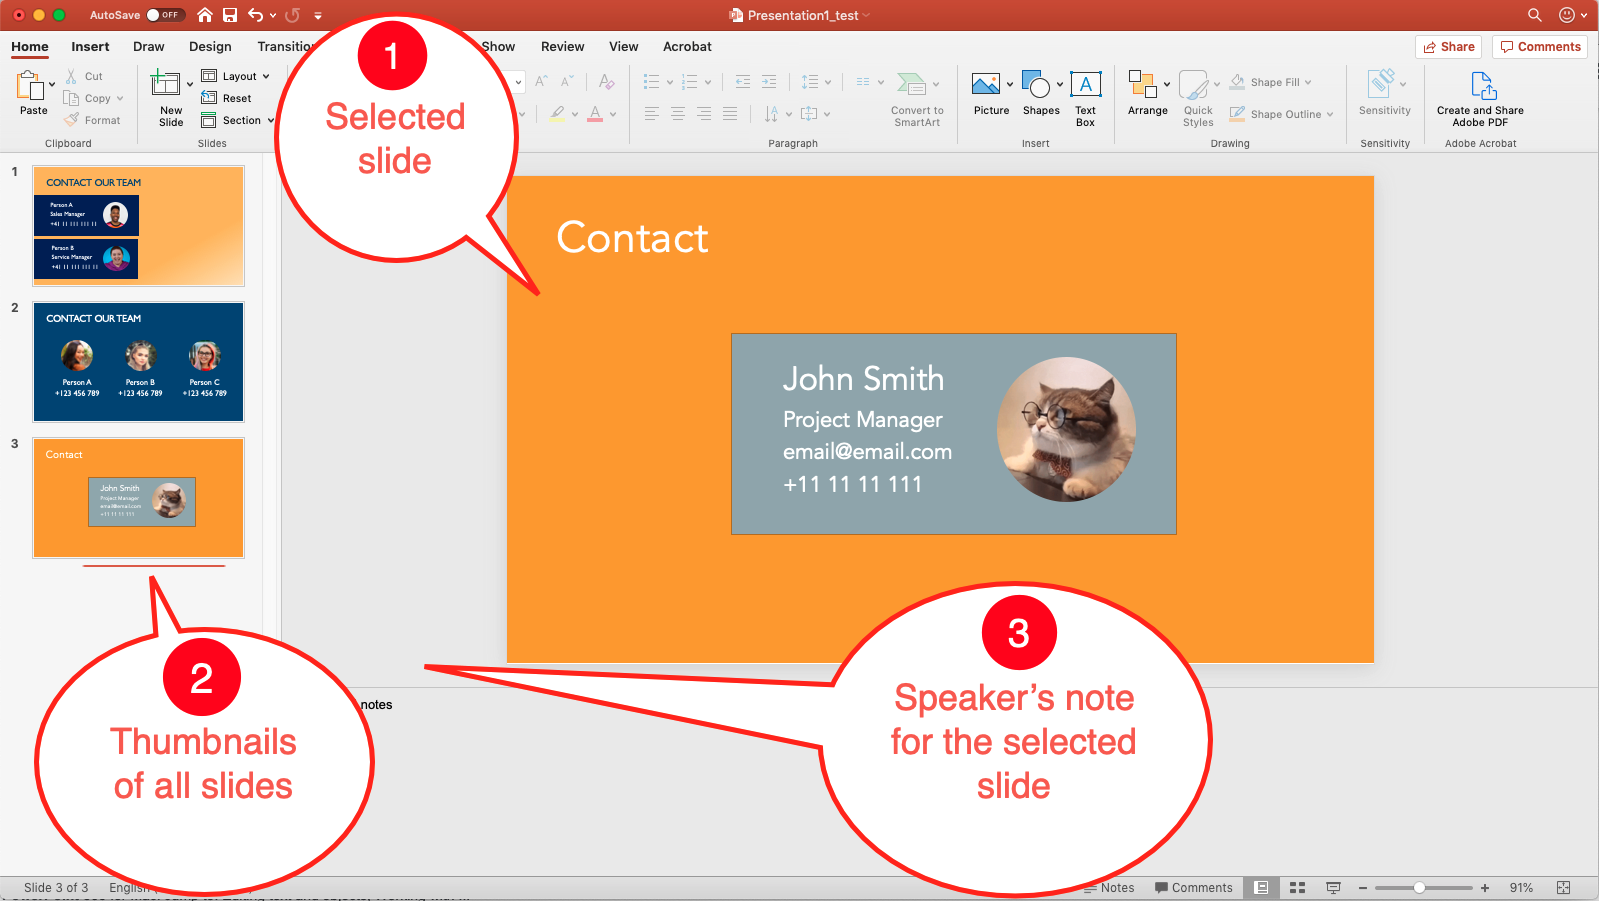 What are the PowerPoint presentation views? - Slidepresso